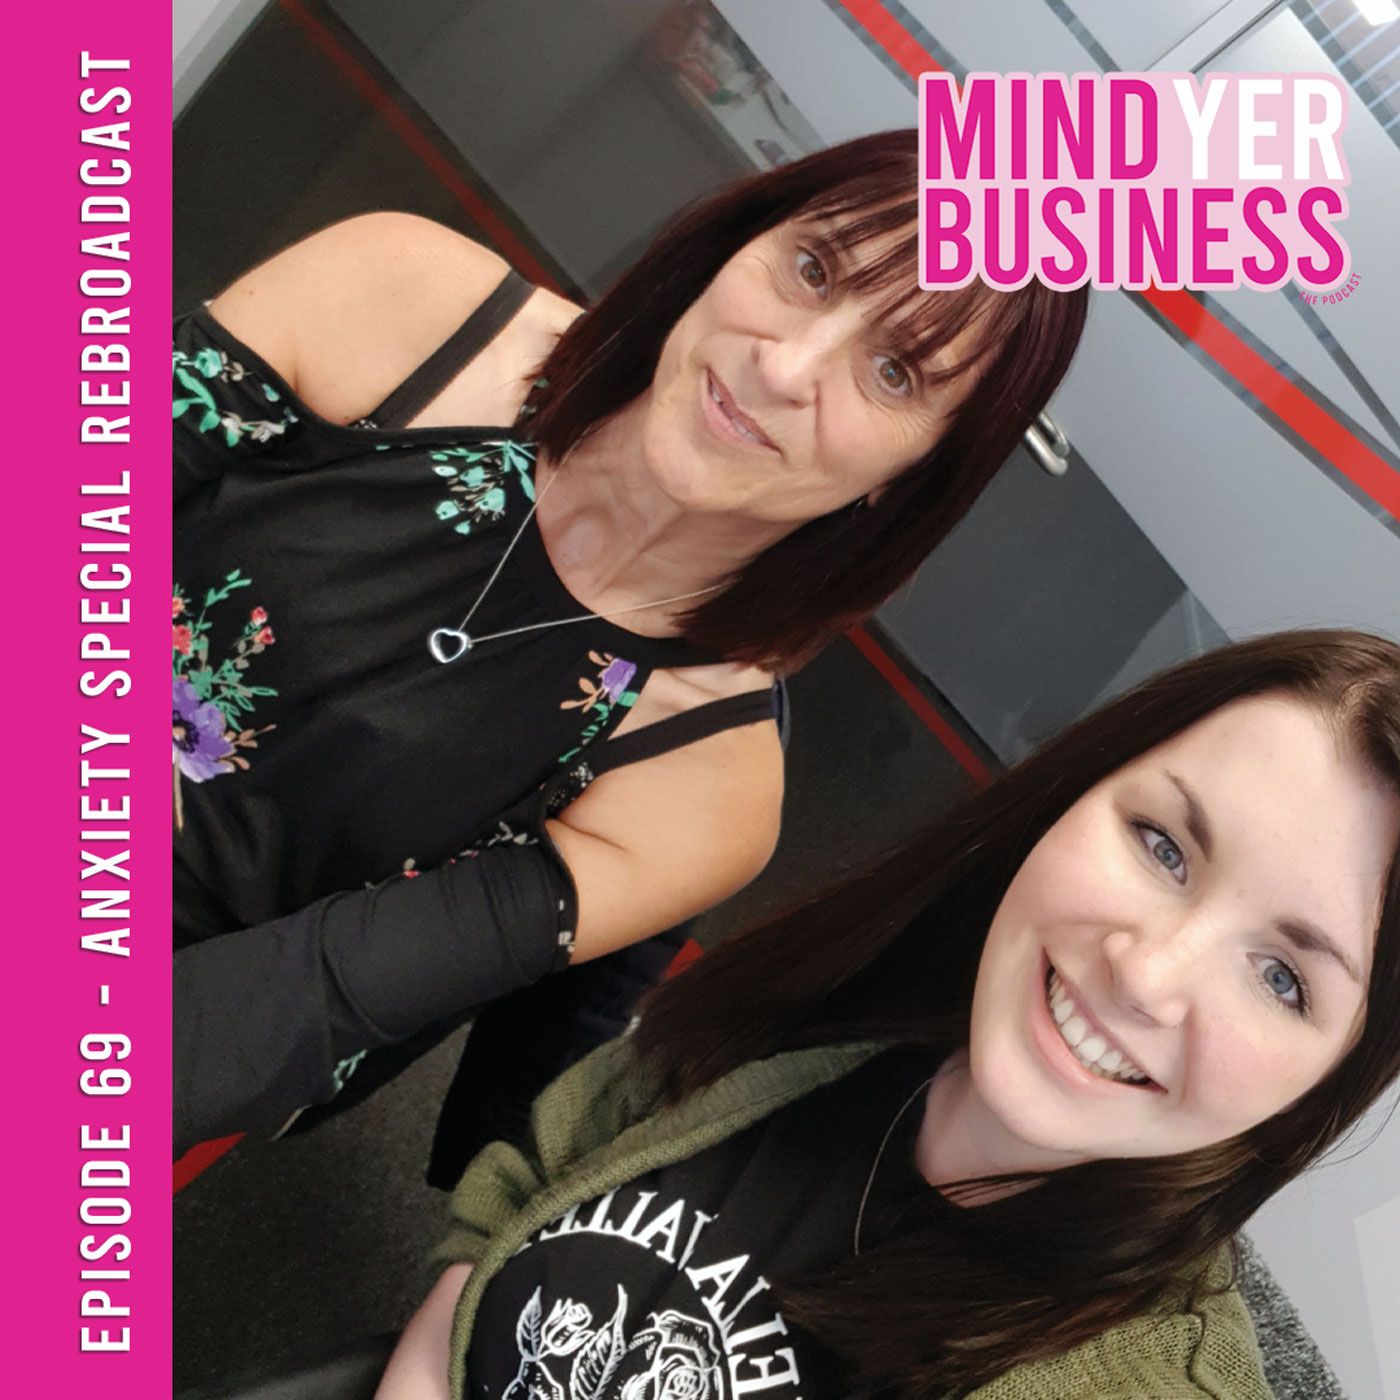 Rebroadcast - Dealing with Anxiety as a Business Owner